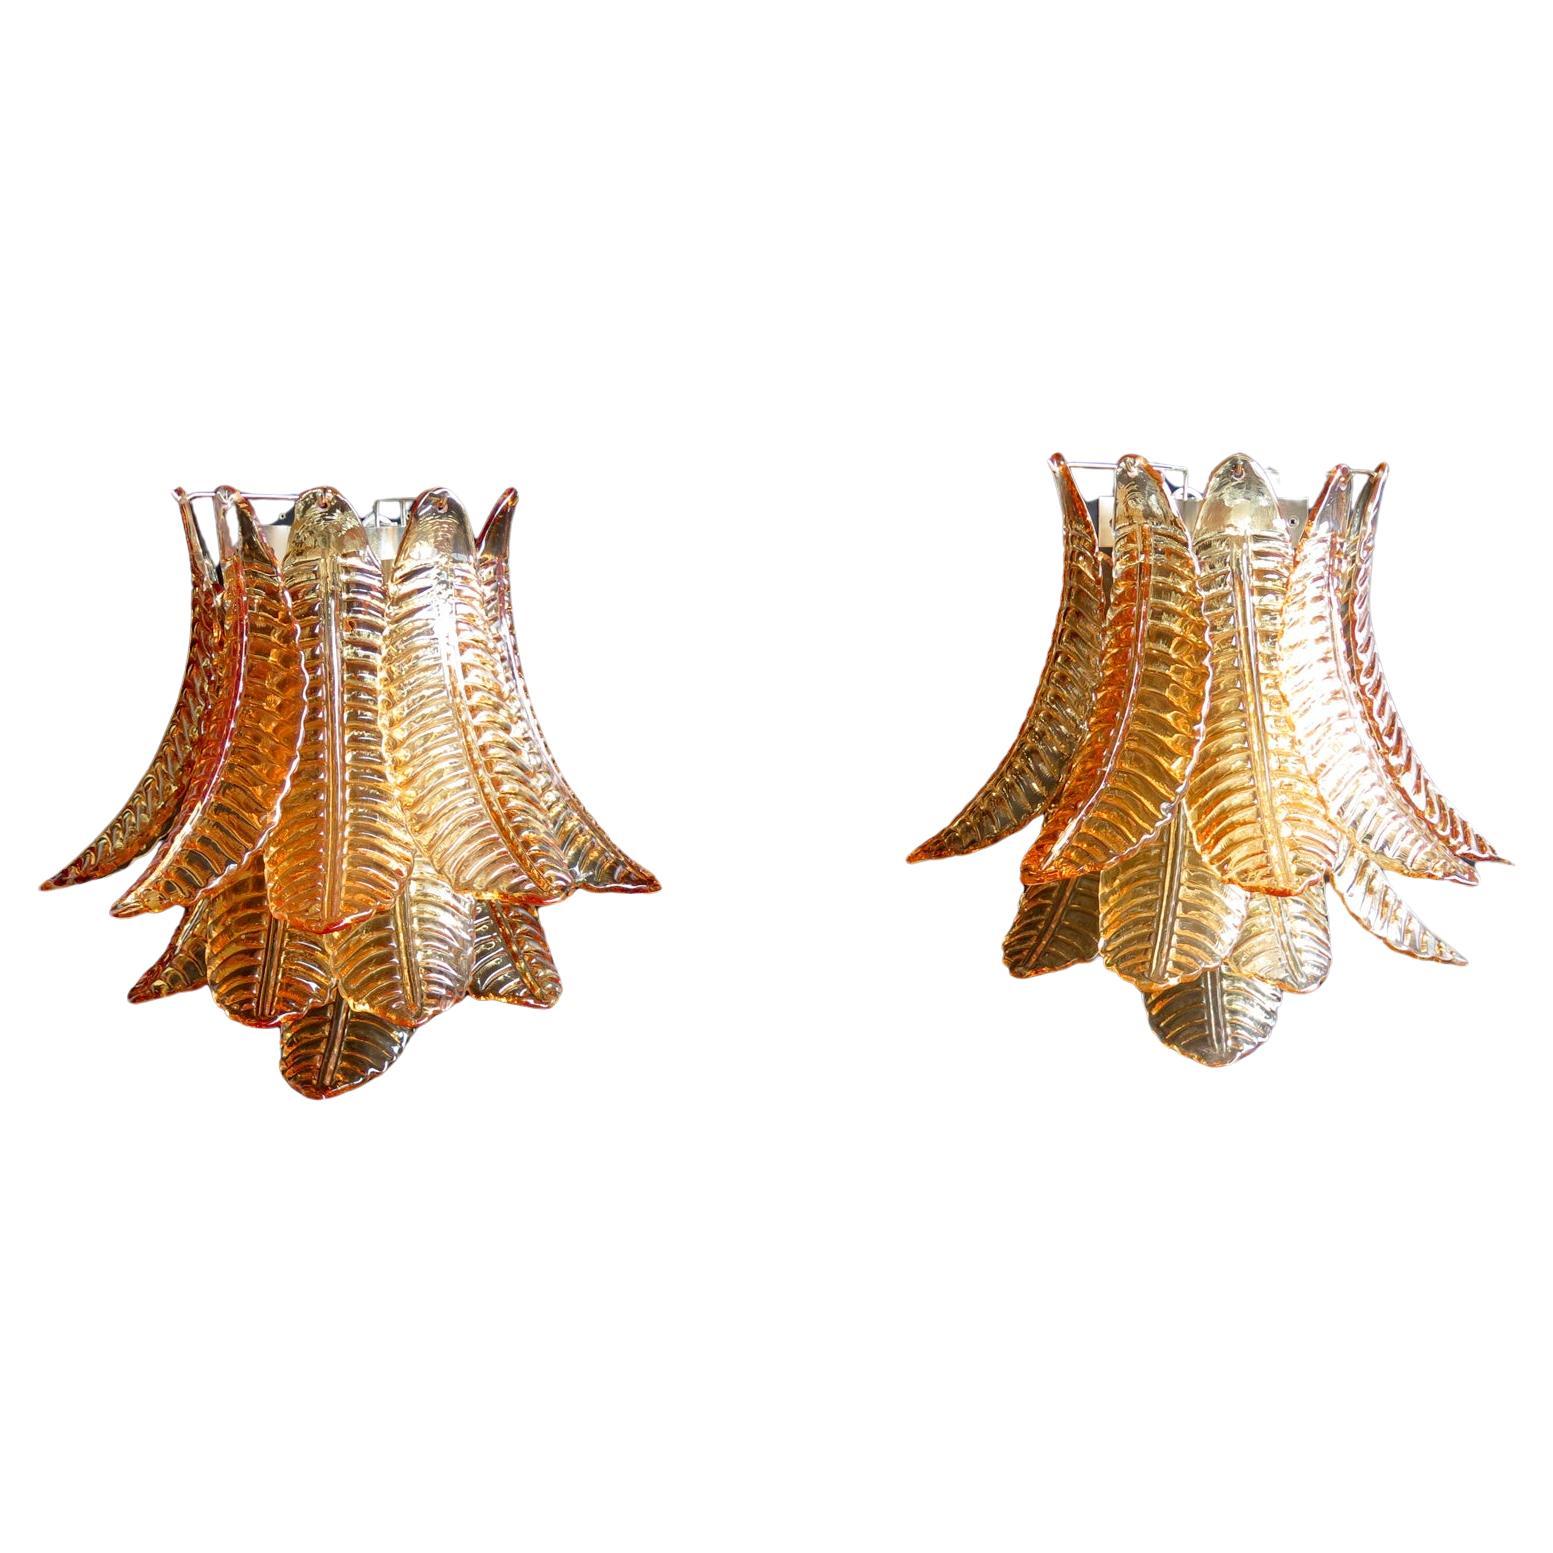 Pair of Vintage Murano Six-Tier Felci Wall Sconce, Amber Glasses For Sale